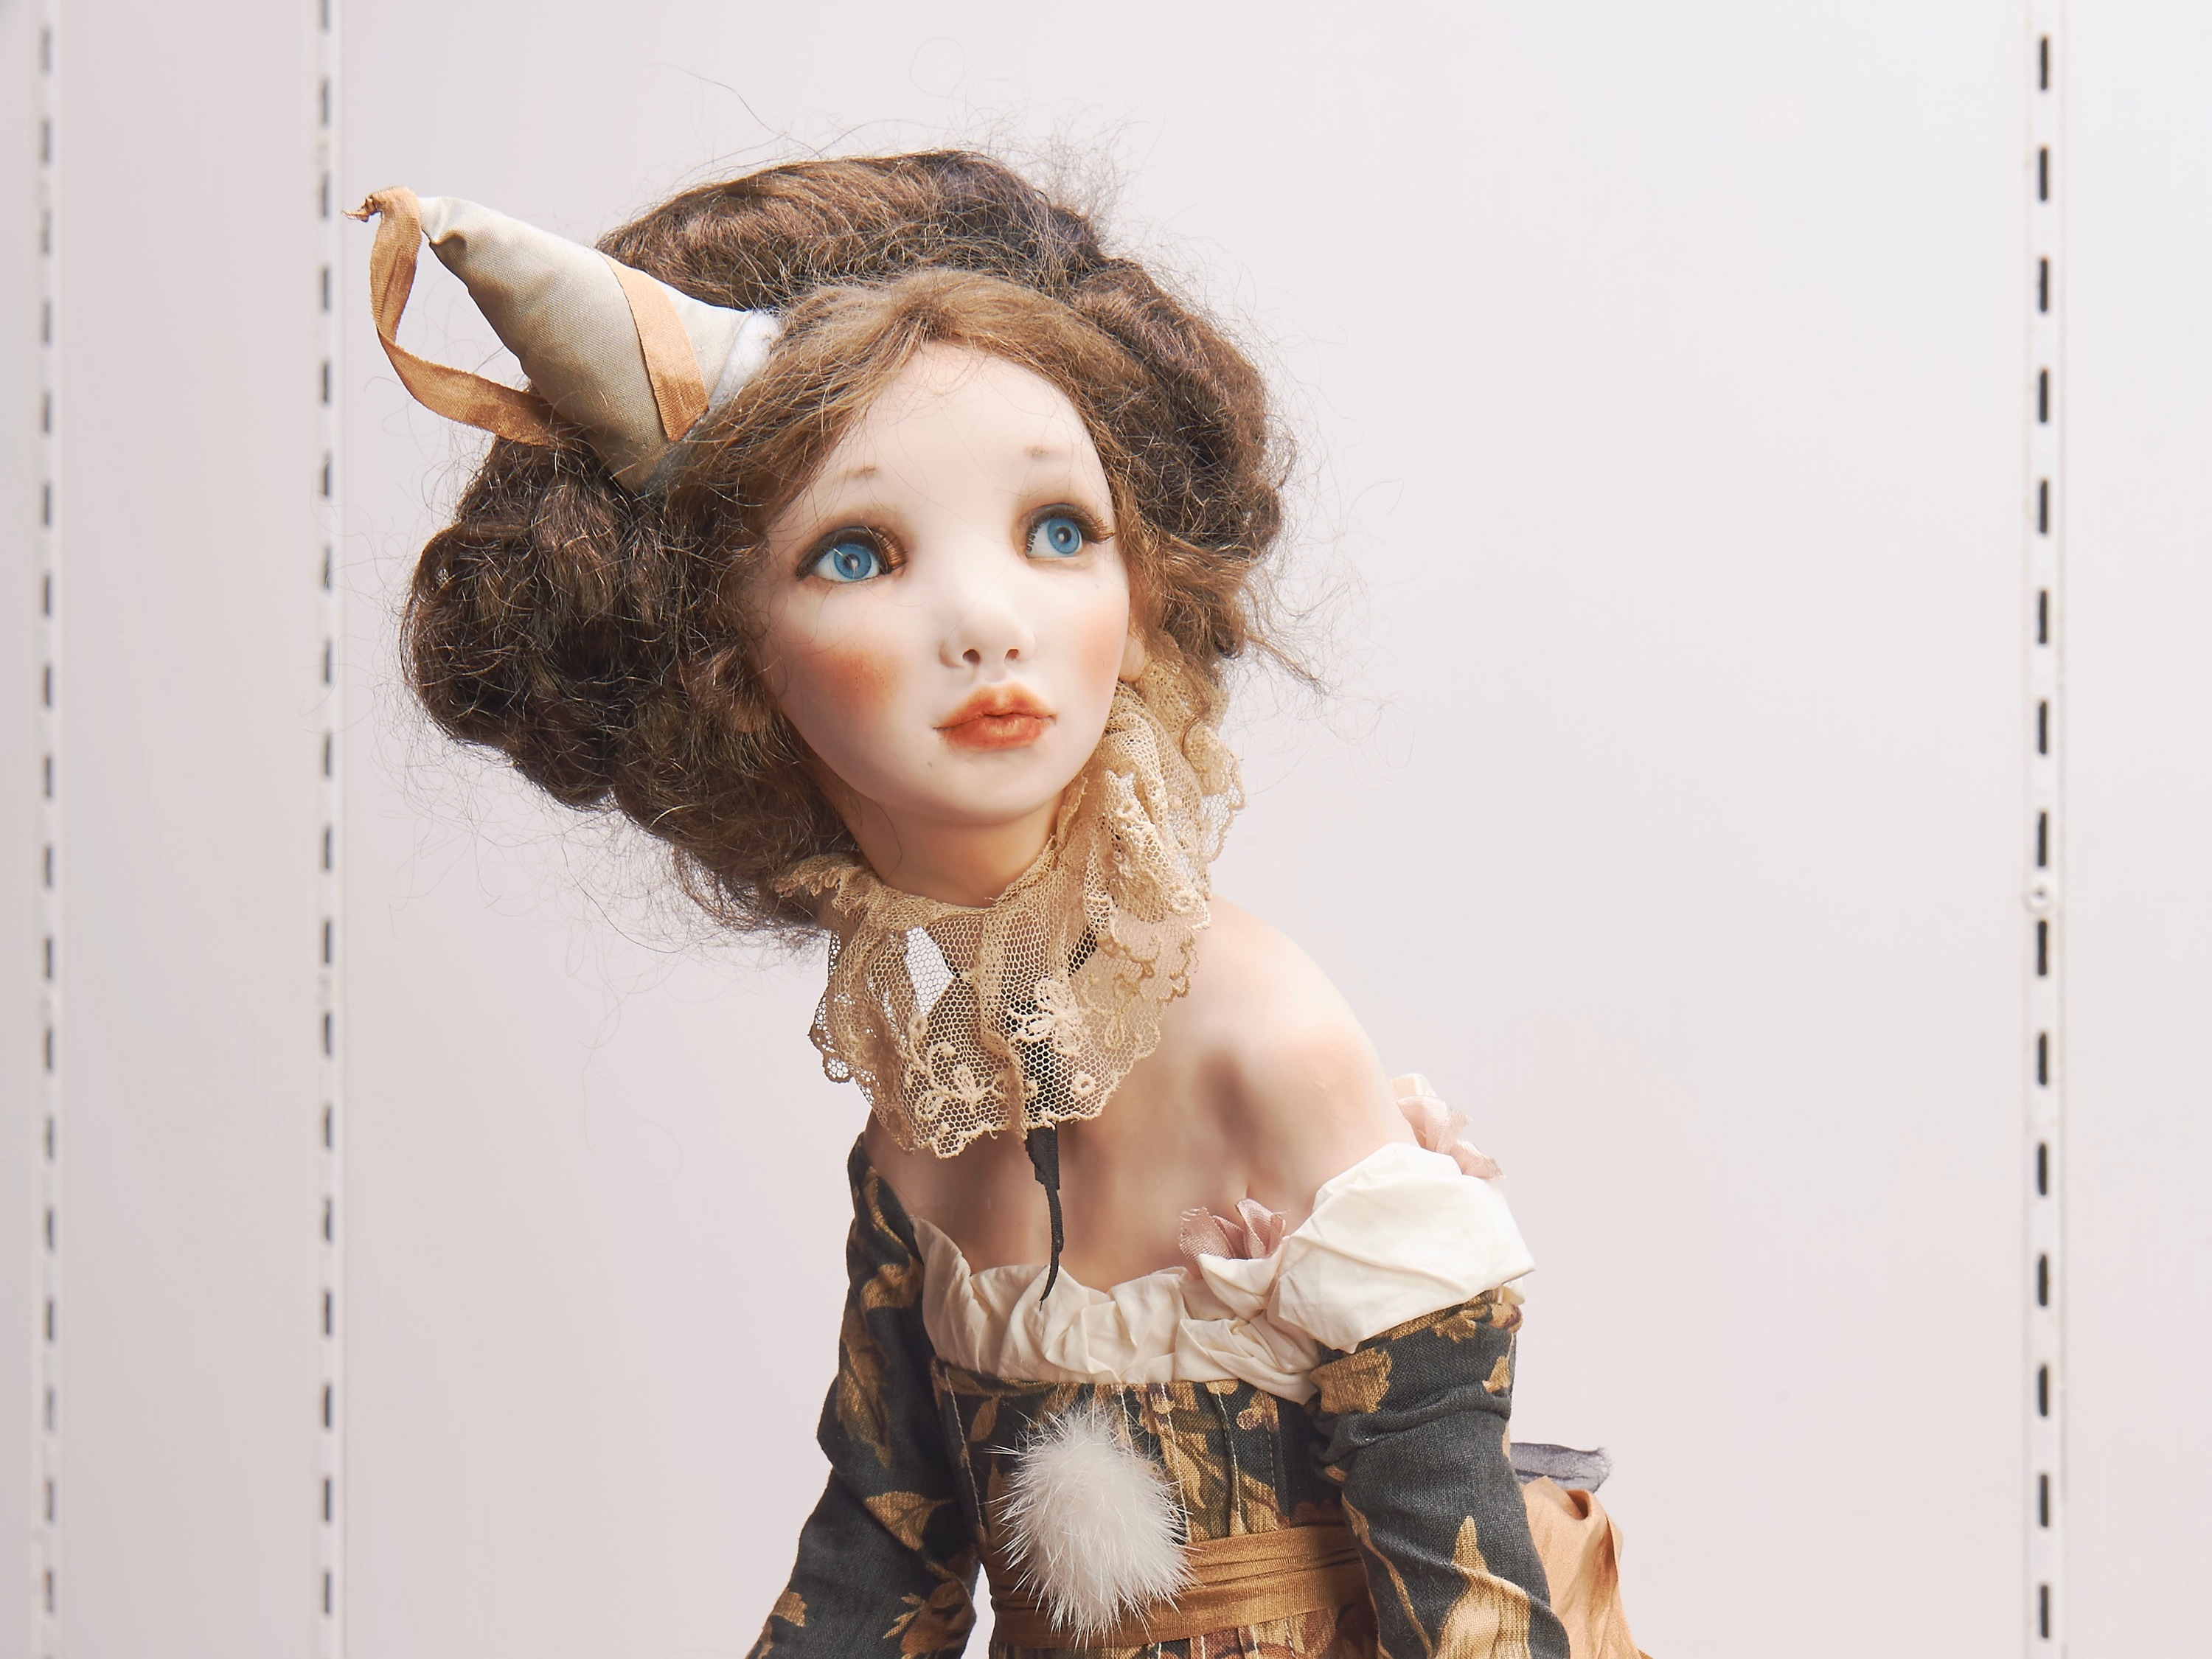 New gallery is dedicated to dolls only